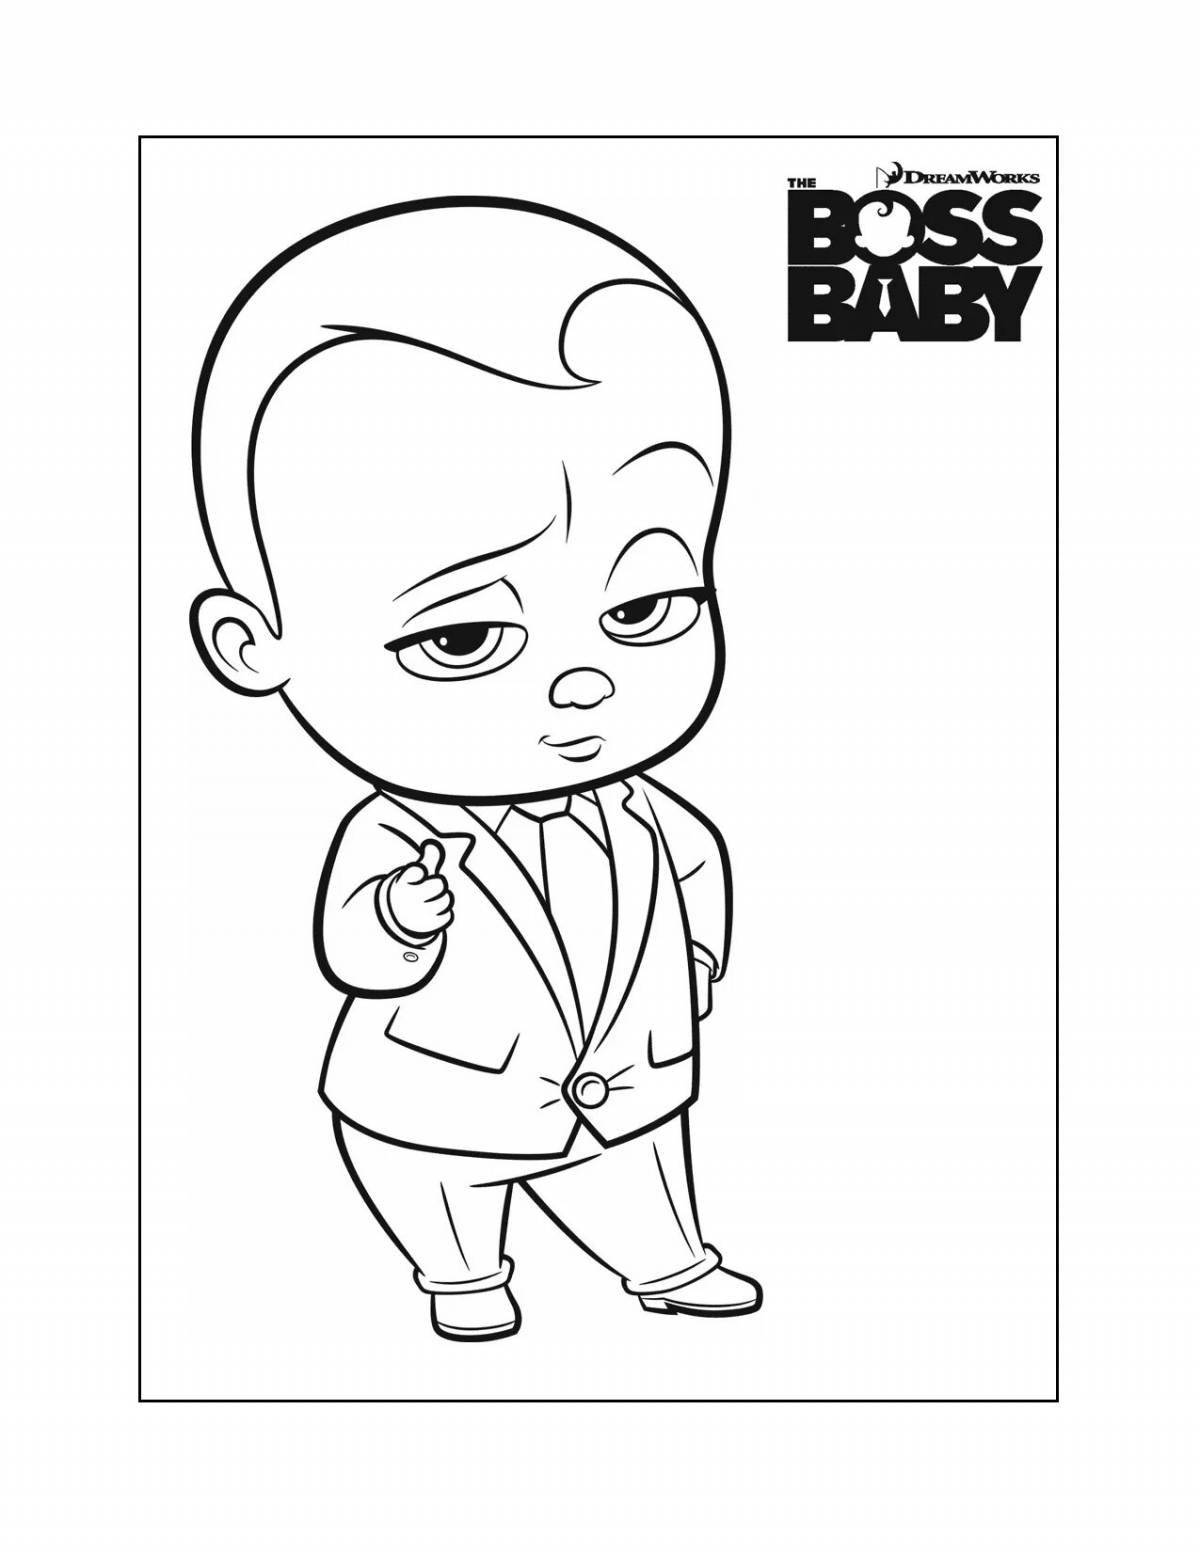 Colorful coloring boss baby figure